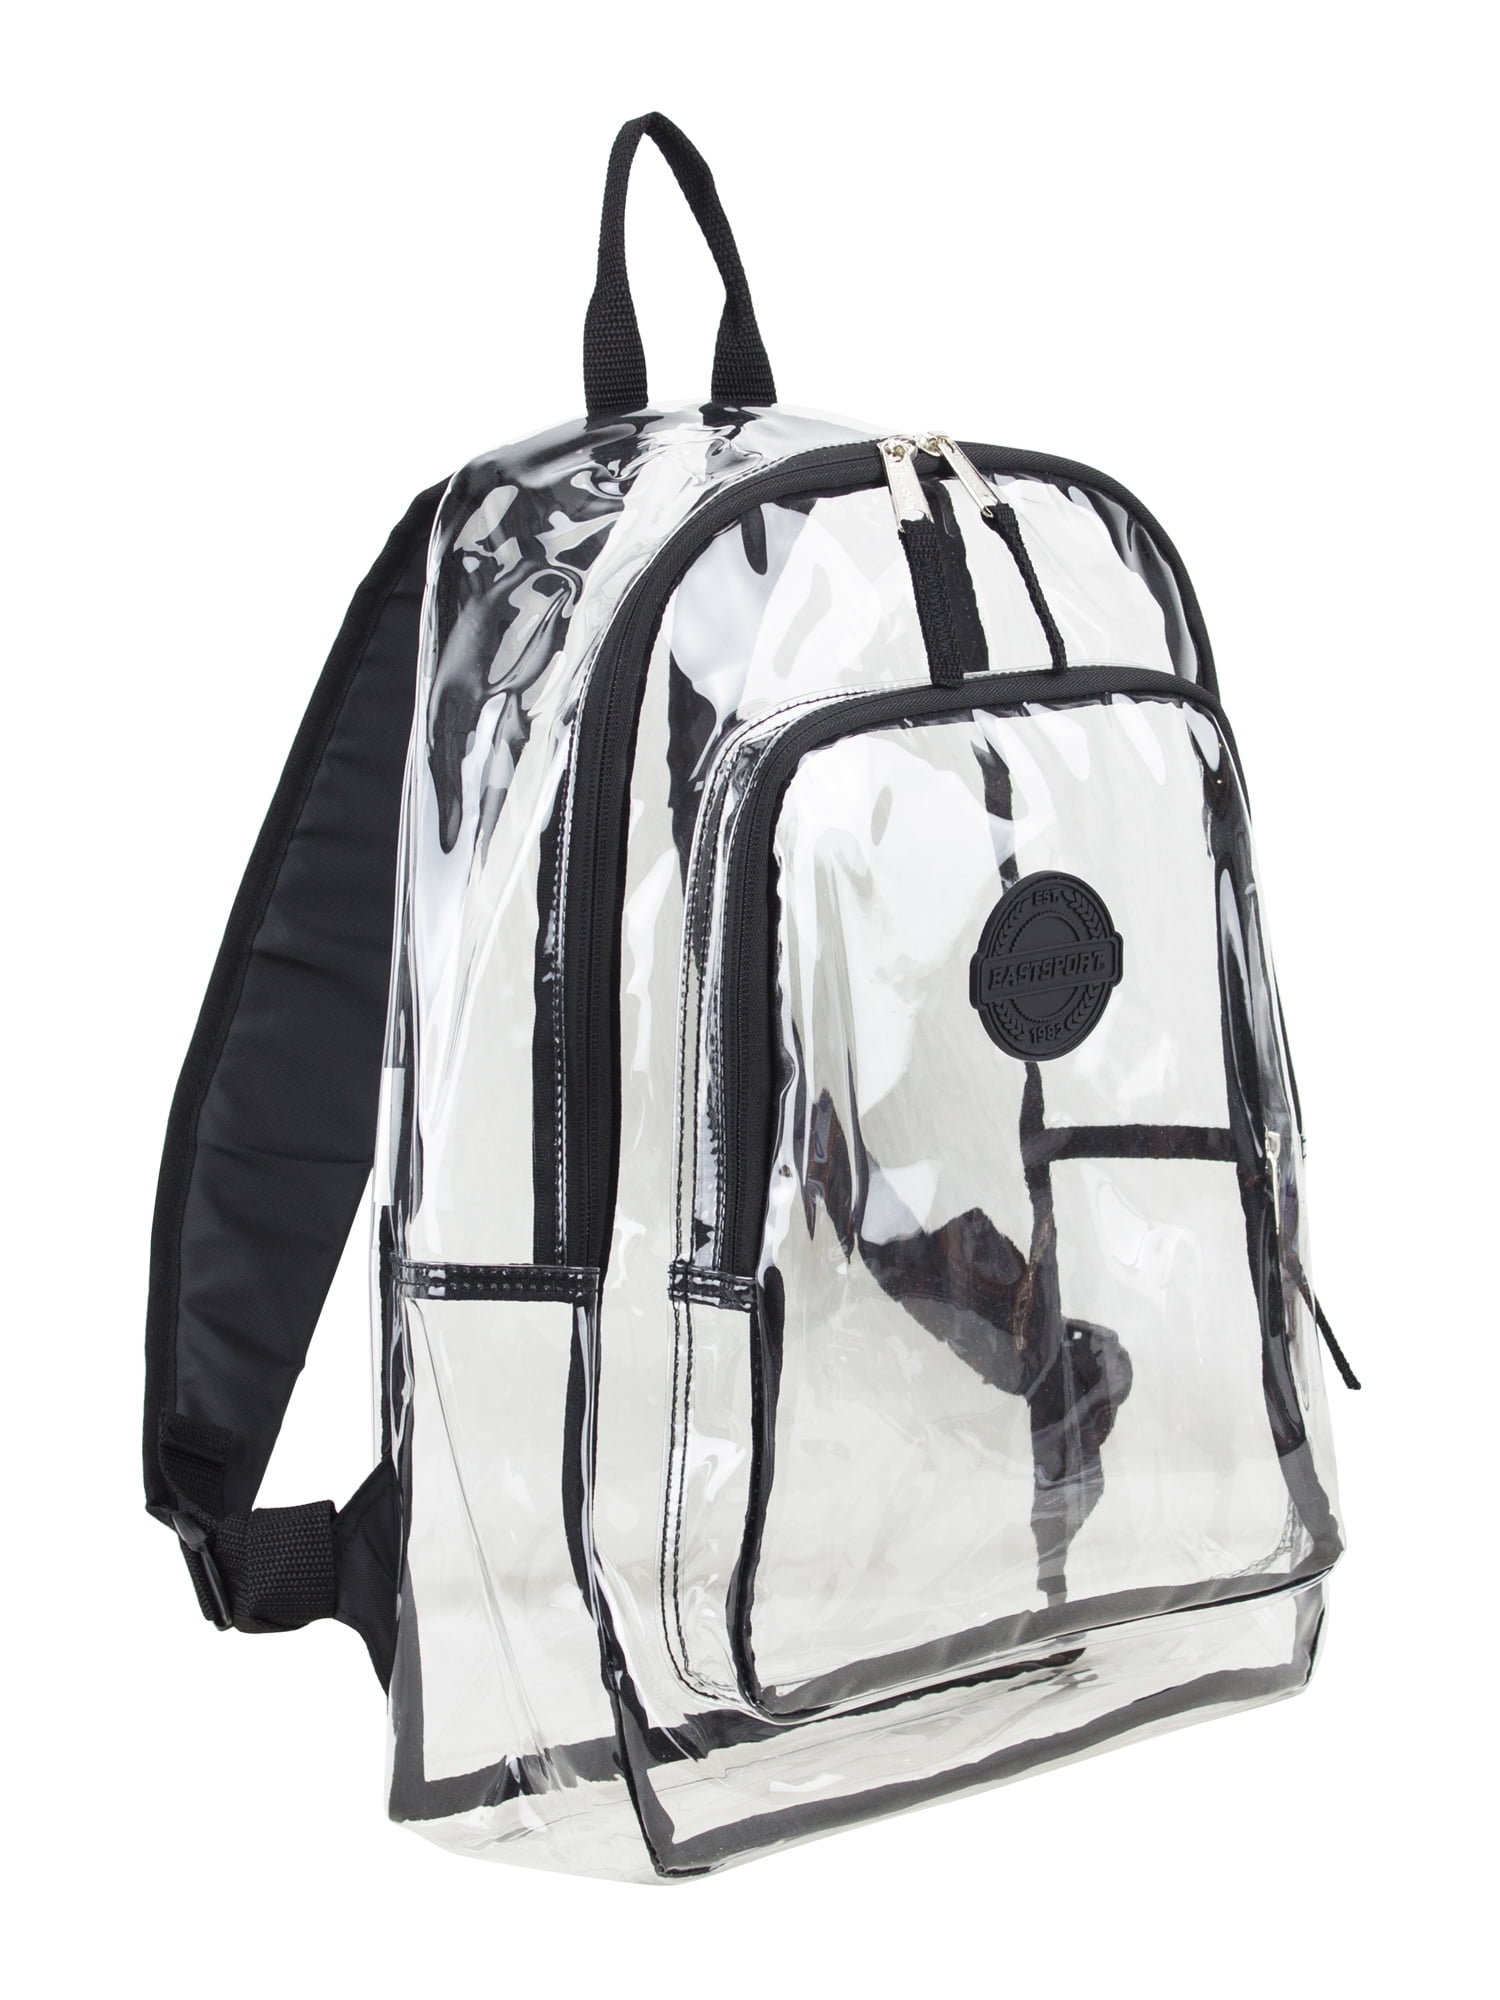 Backpack With Clear Front | vlr.eng.br